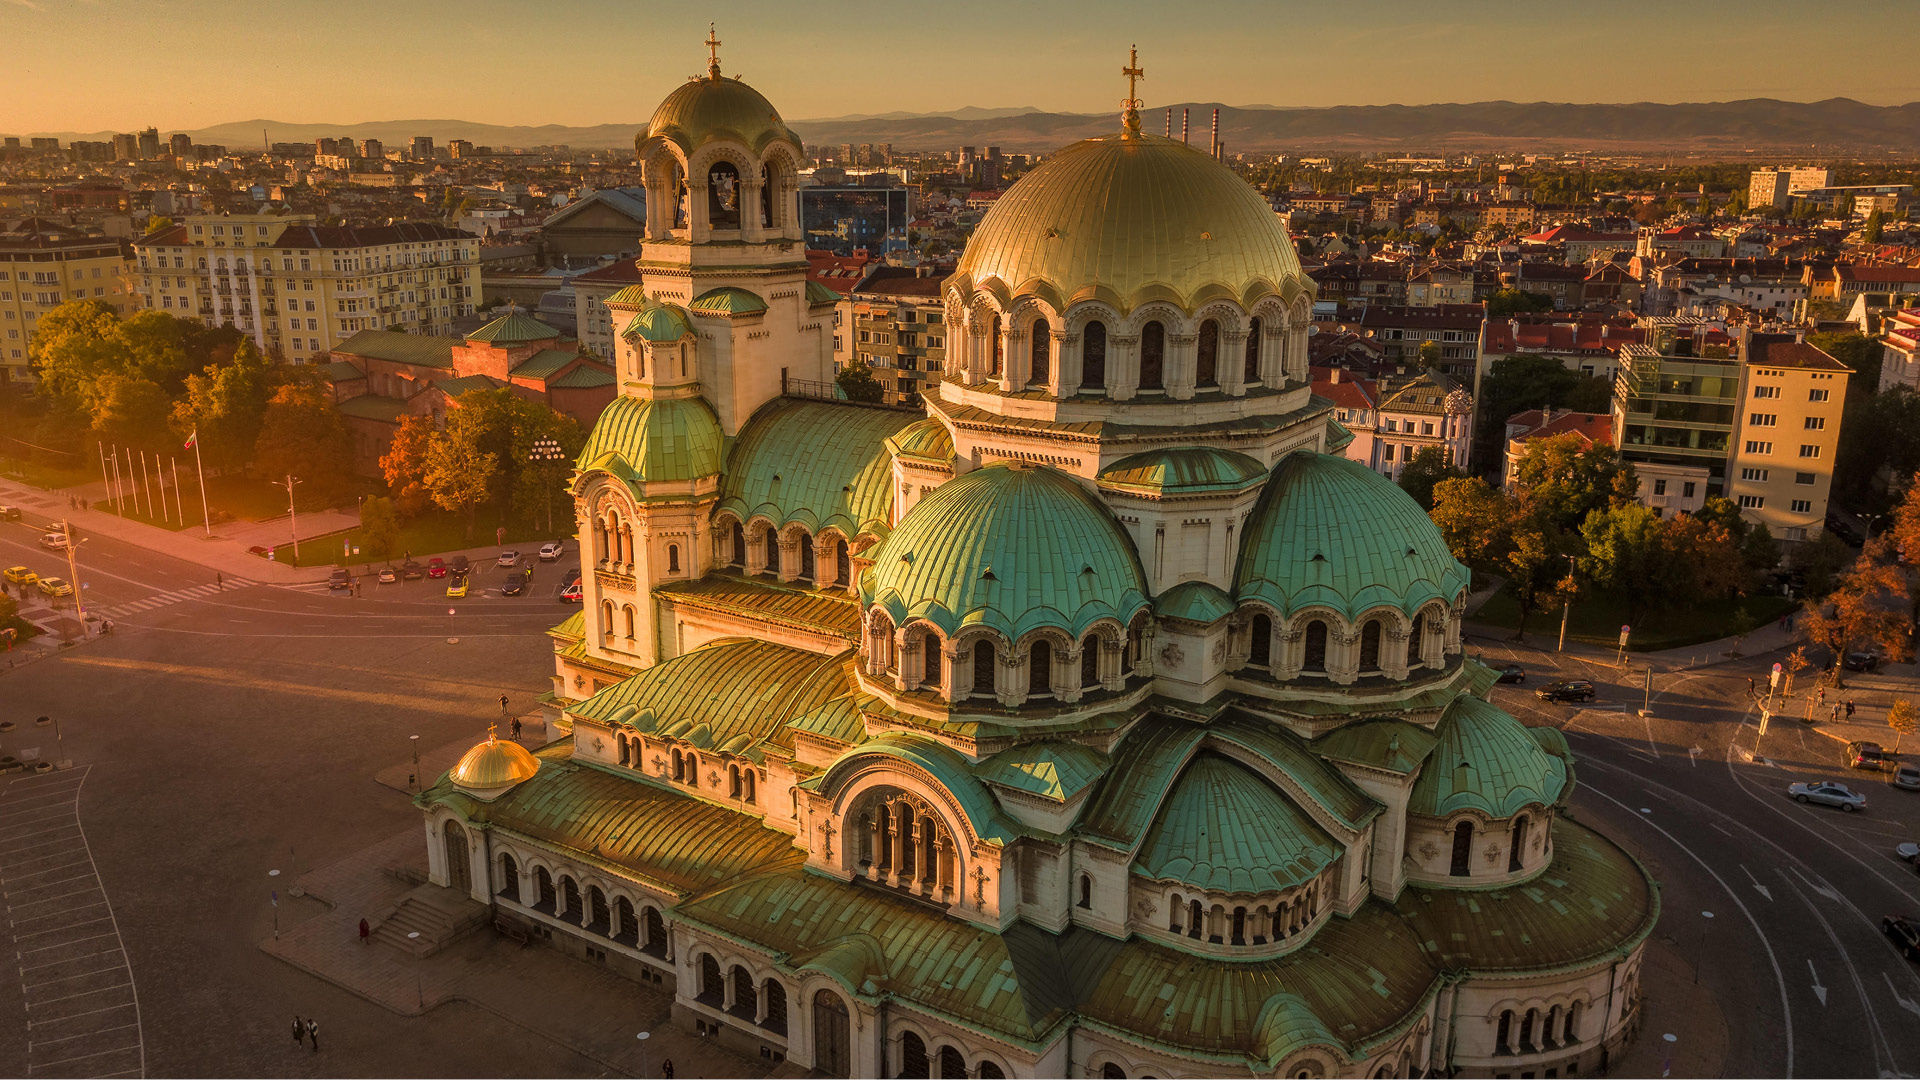 It's Time To Immerse Yourself Sofia, The Balkan Jewel